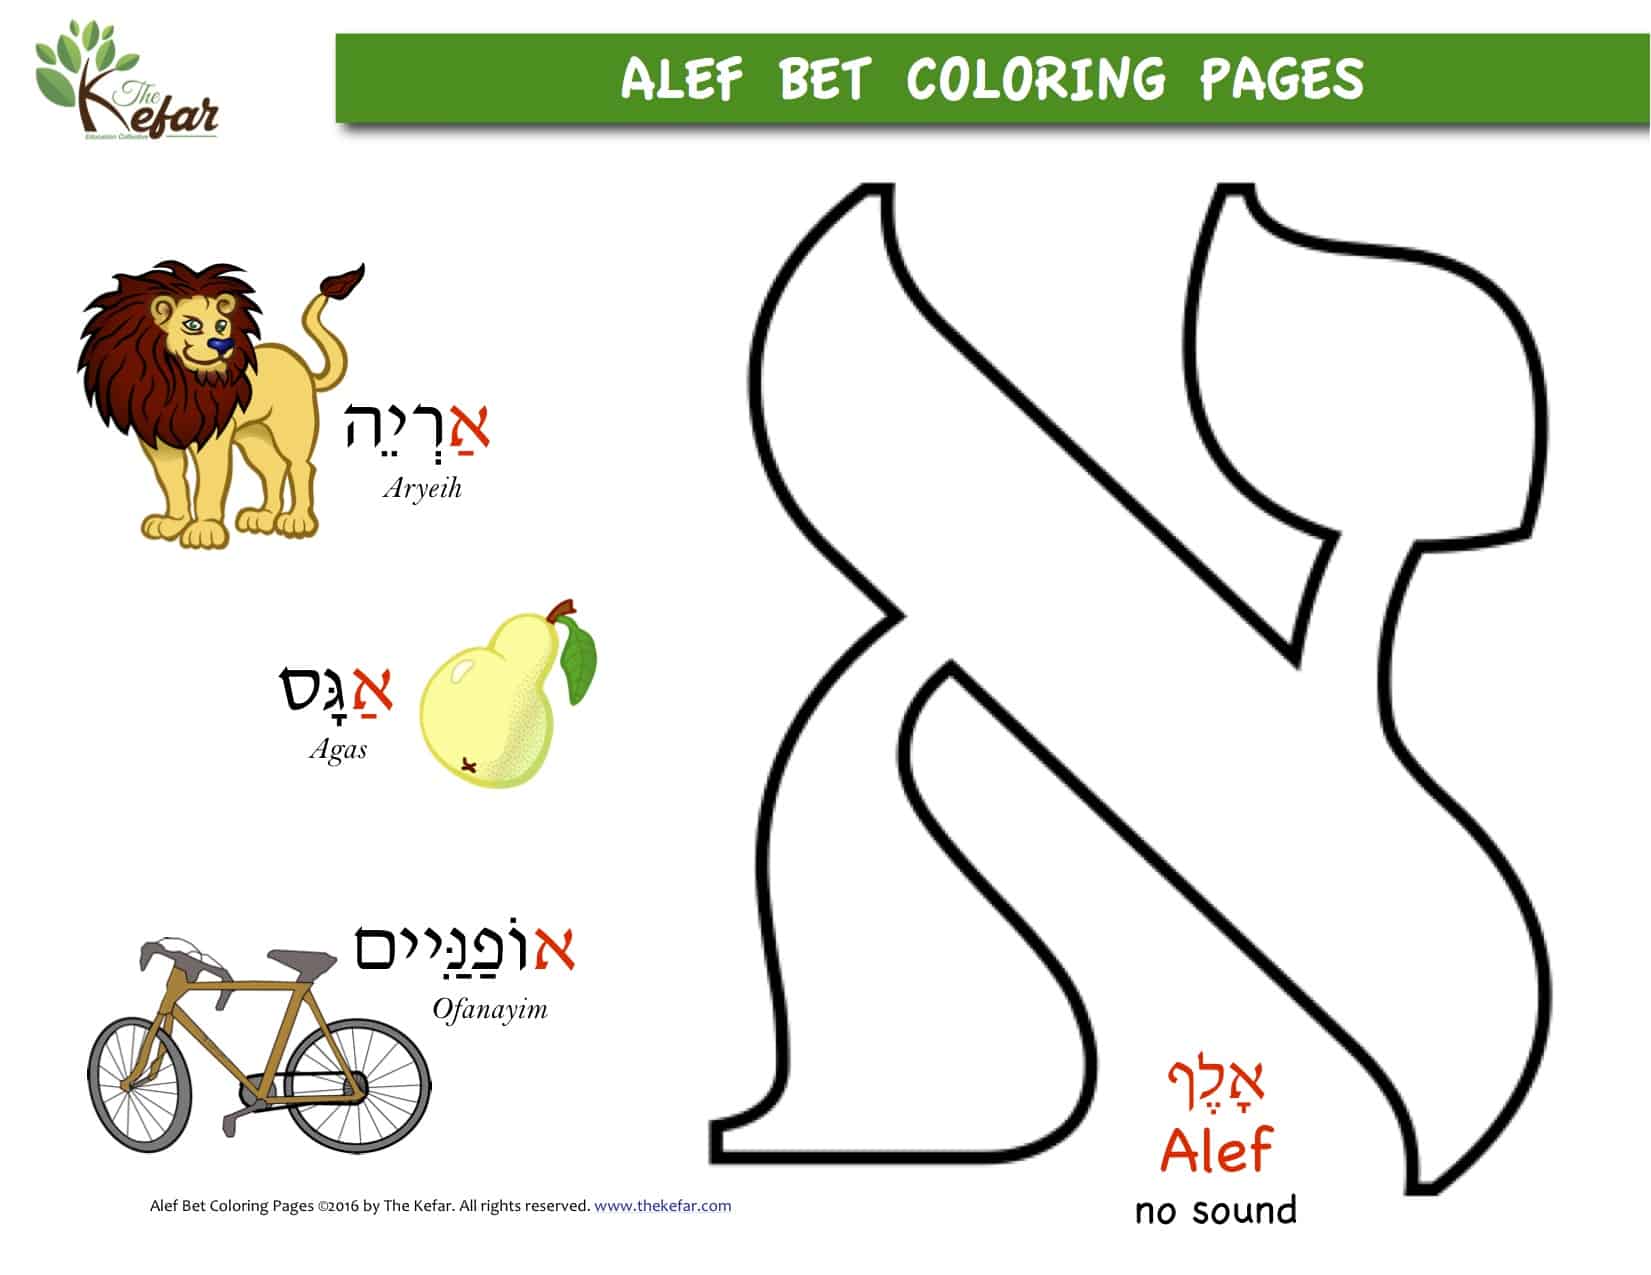 Alef Bet Coloring Pages   The Kefar